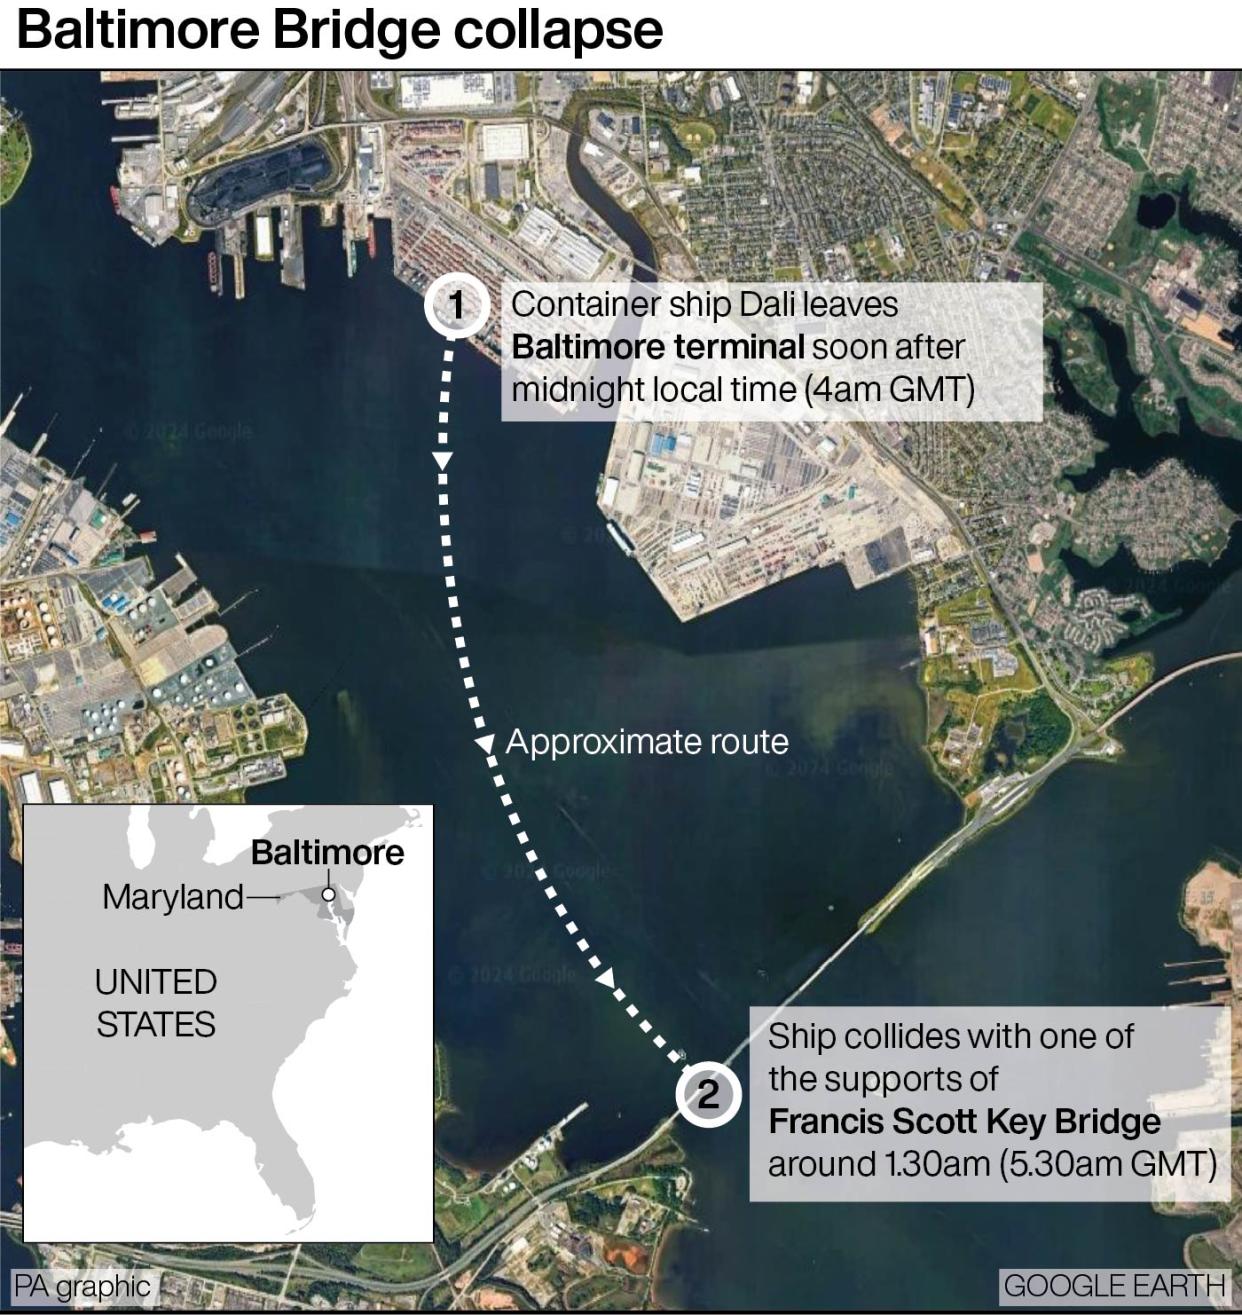 The approximate route of the vessel before it collided with the bridge in Baltimore. (PA)